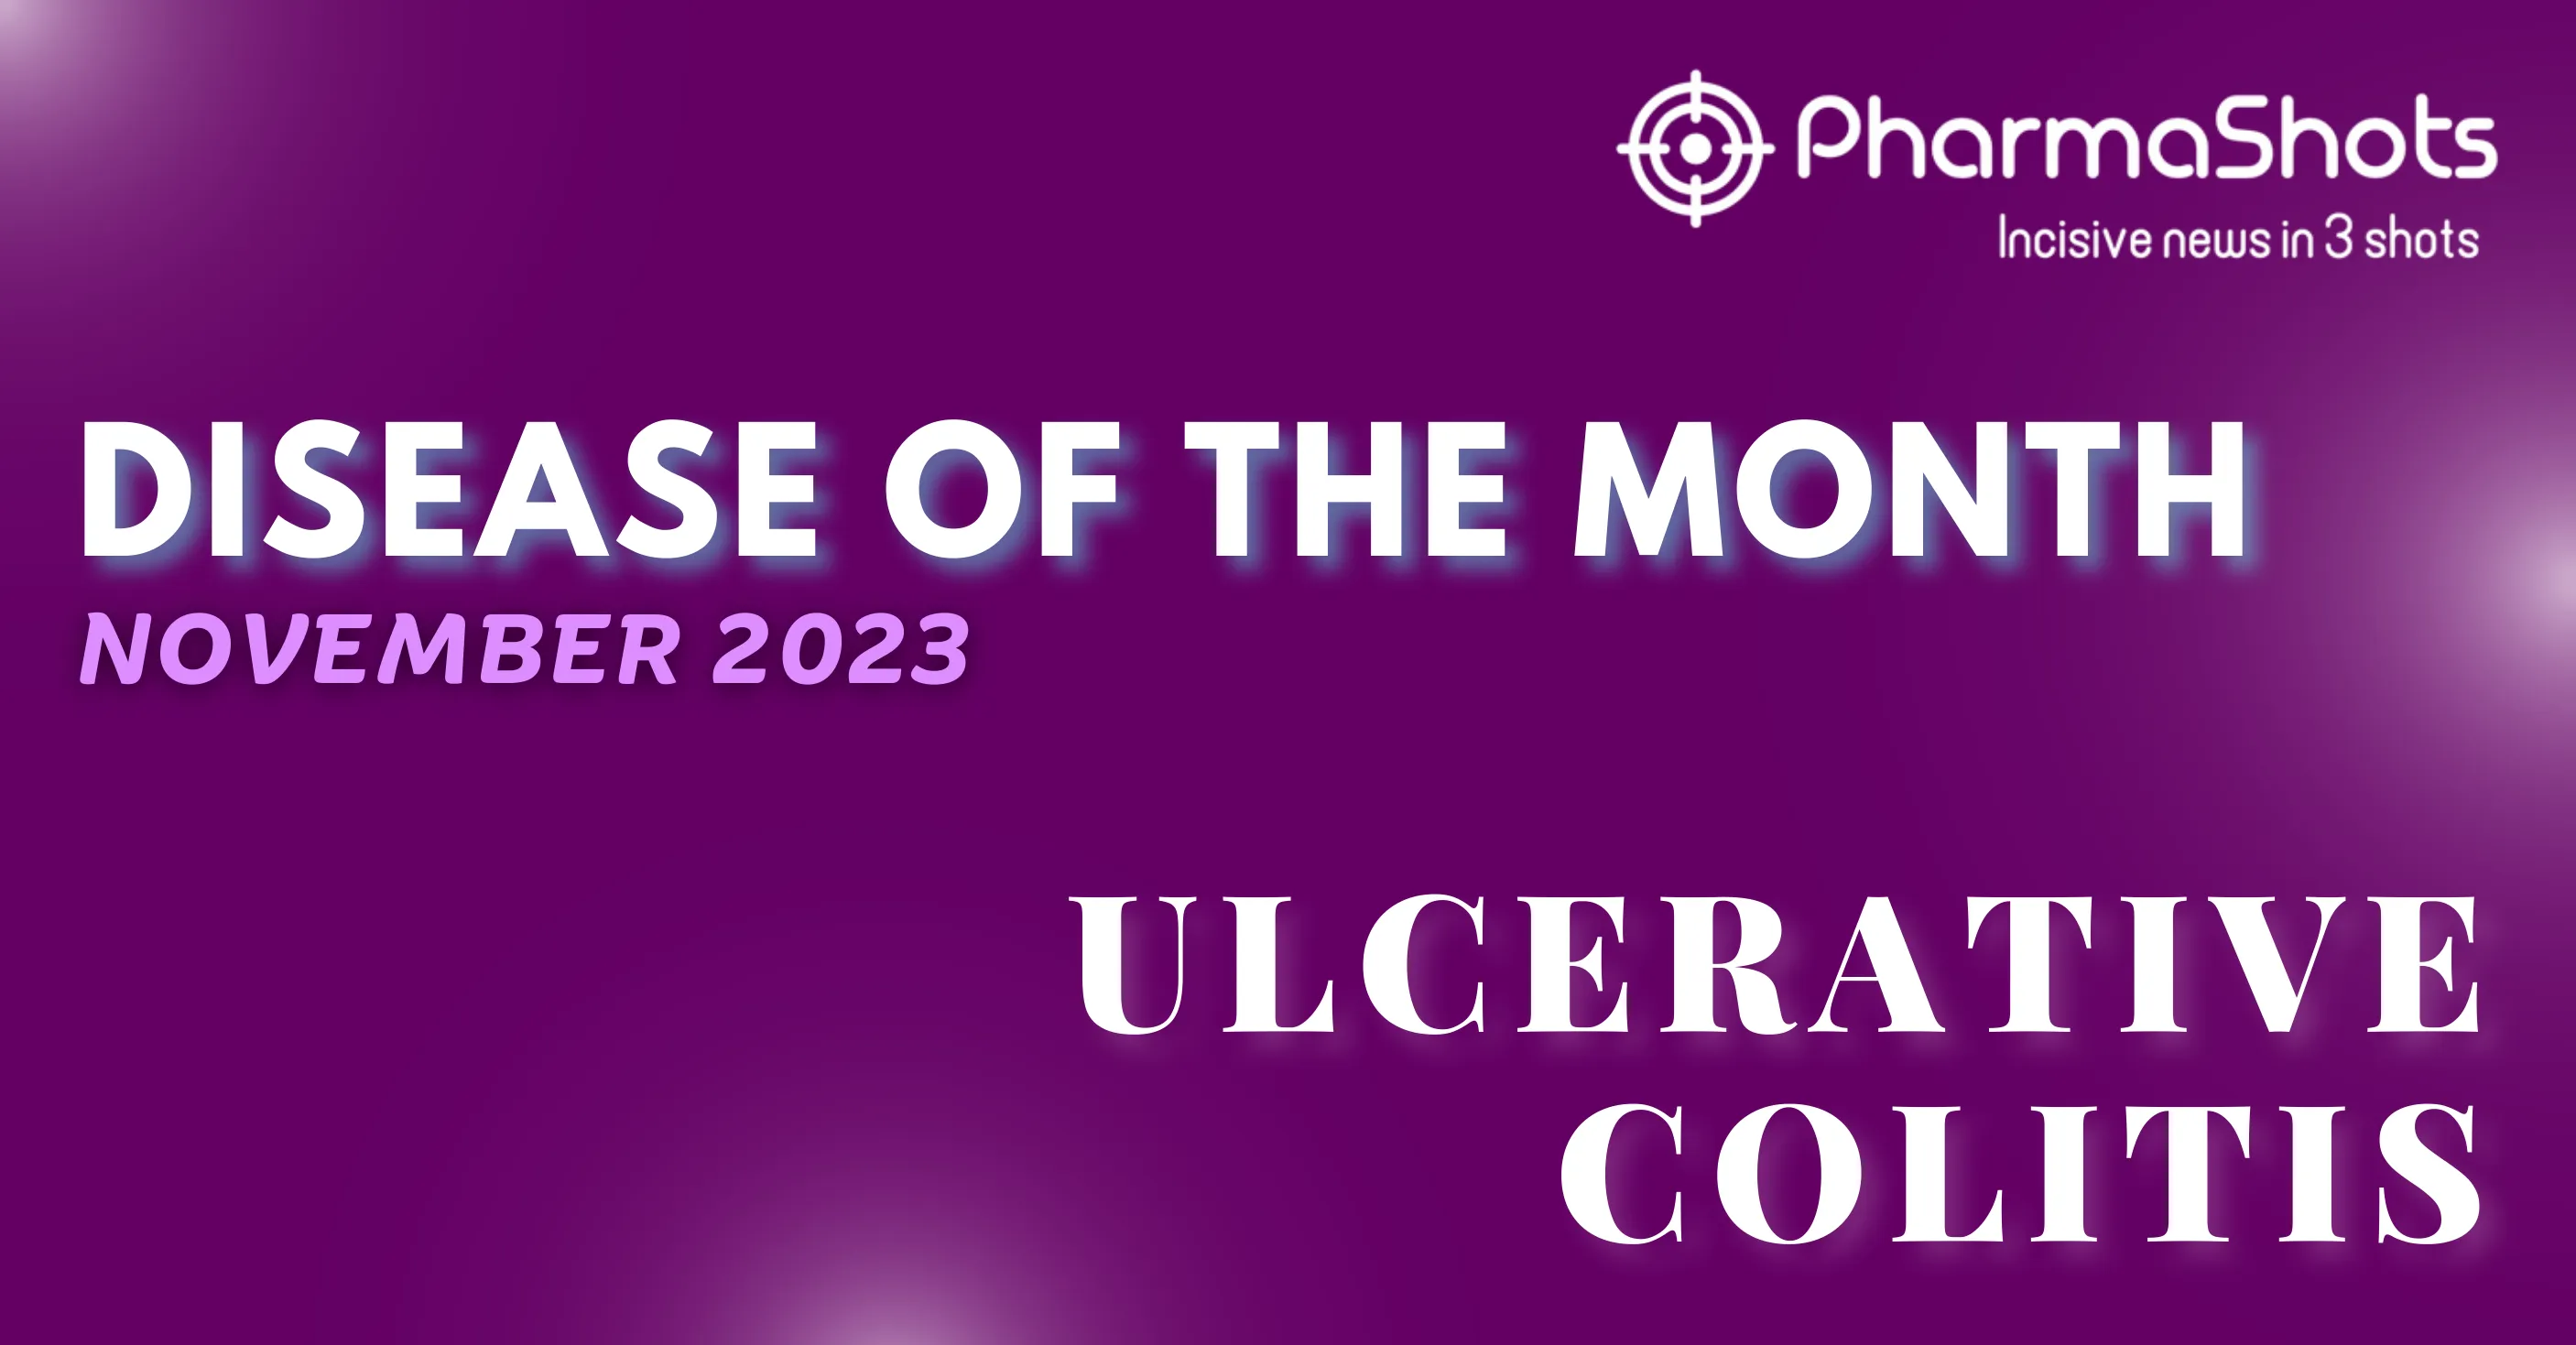 Disease of the Month - Ulcerative Colitis